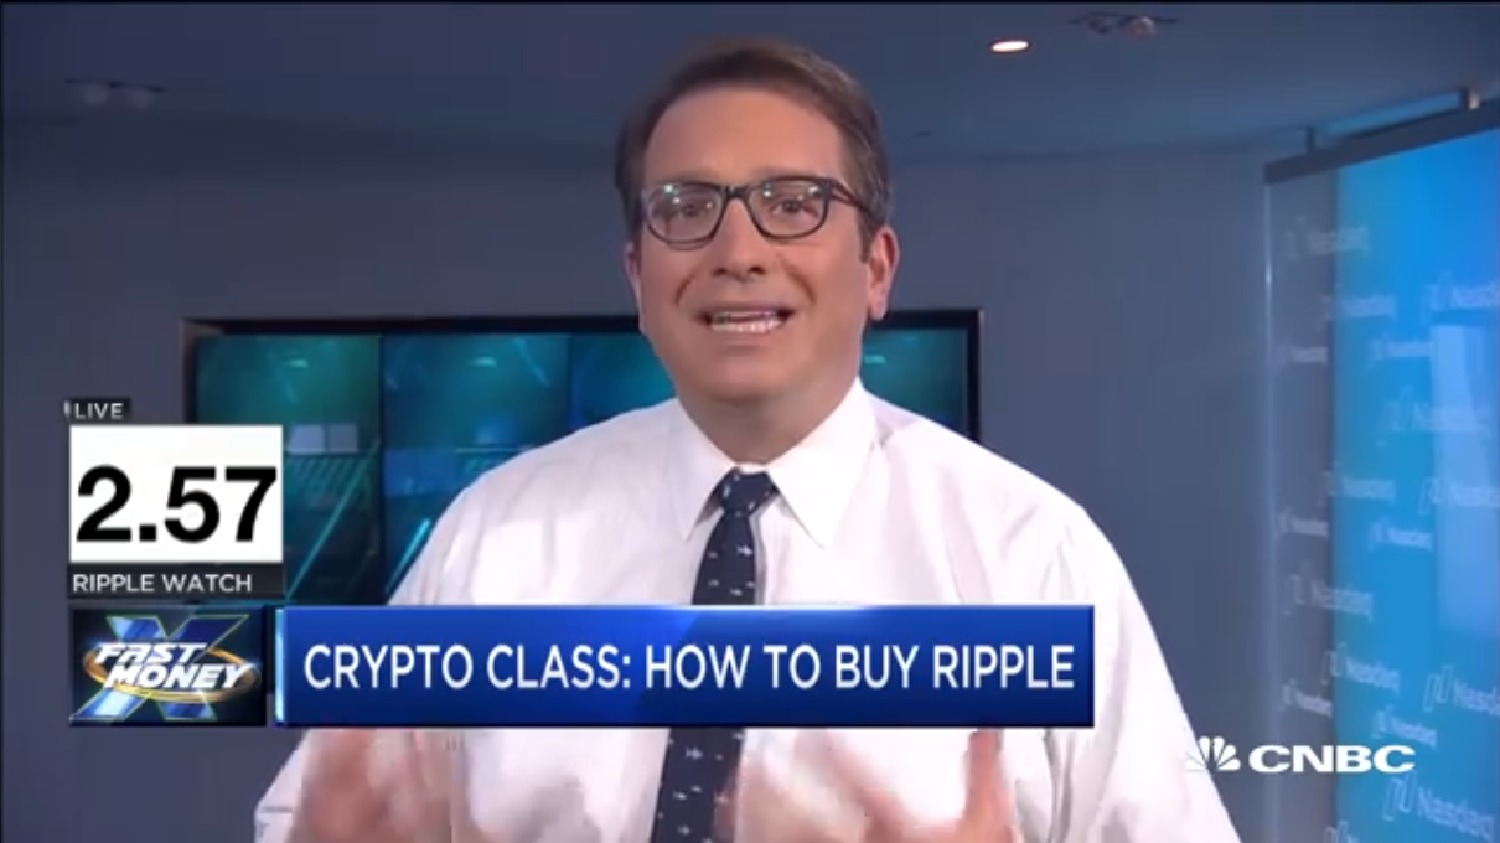 Google cnbc bitcoin ripple cryptocurrency live chat